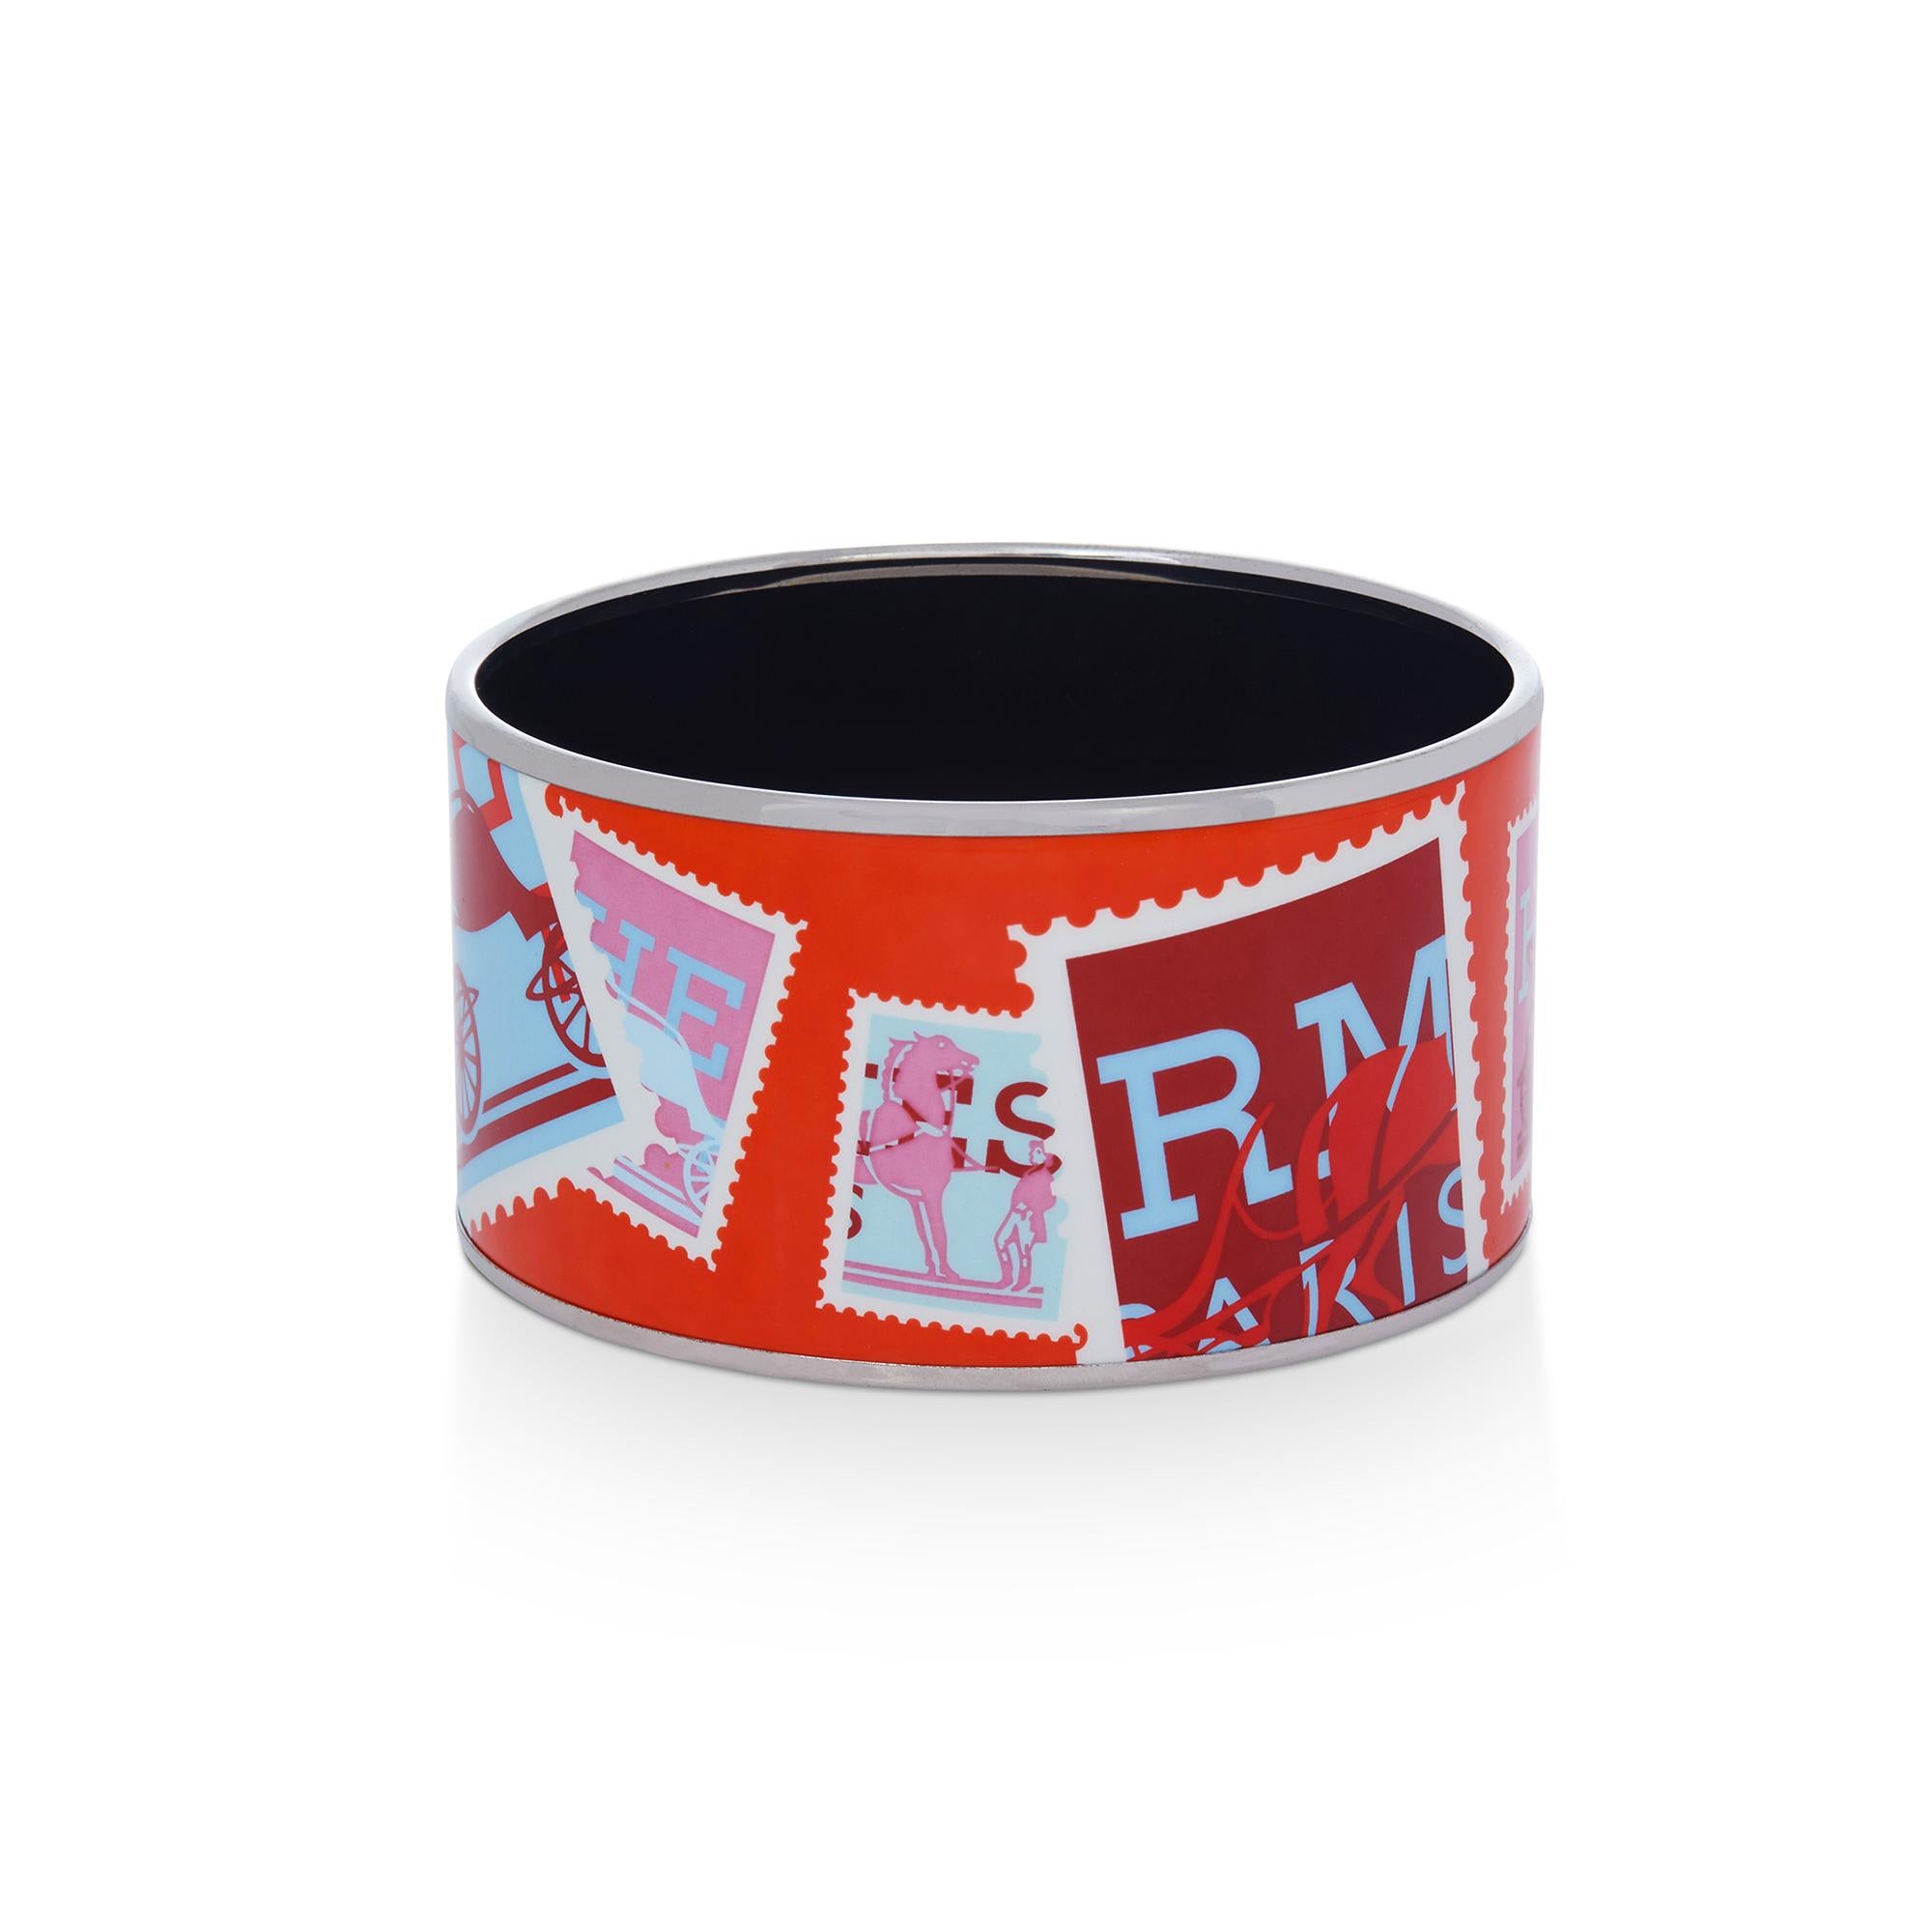 Authentic Hermès Paris bangle features multi-colored enamel work with a postage stamp theme. Signed Hermès Paris, Made in Austria, +K. Bracelet measure 1 1/2 inches in width, 8 1/4 inch internal circumference, will fit up to a 7 1/2-inch wrist.  The